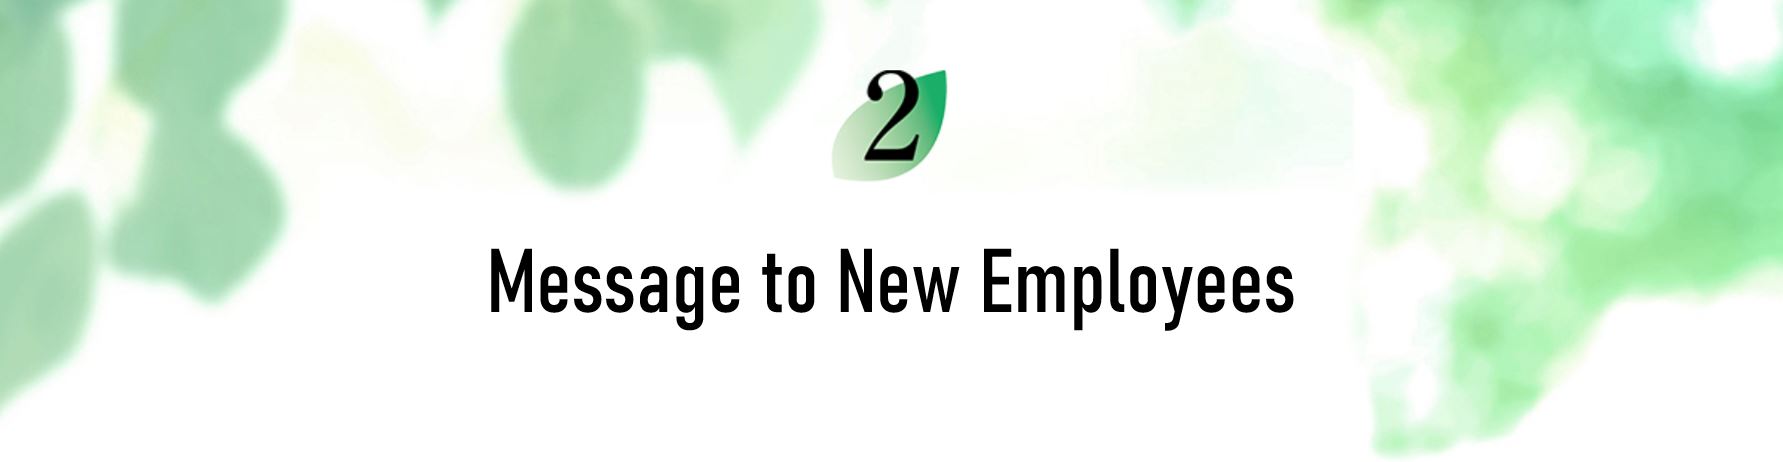 2. Message to New Employees